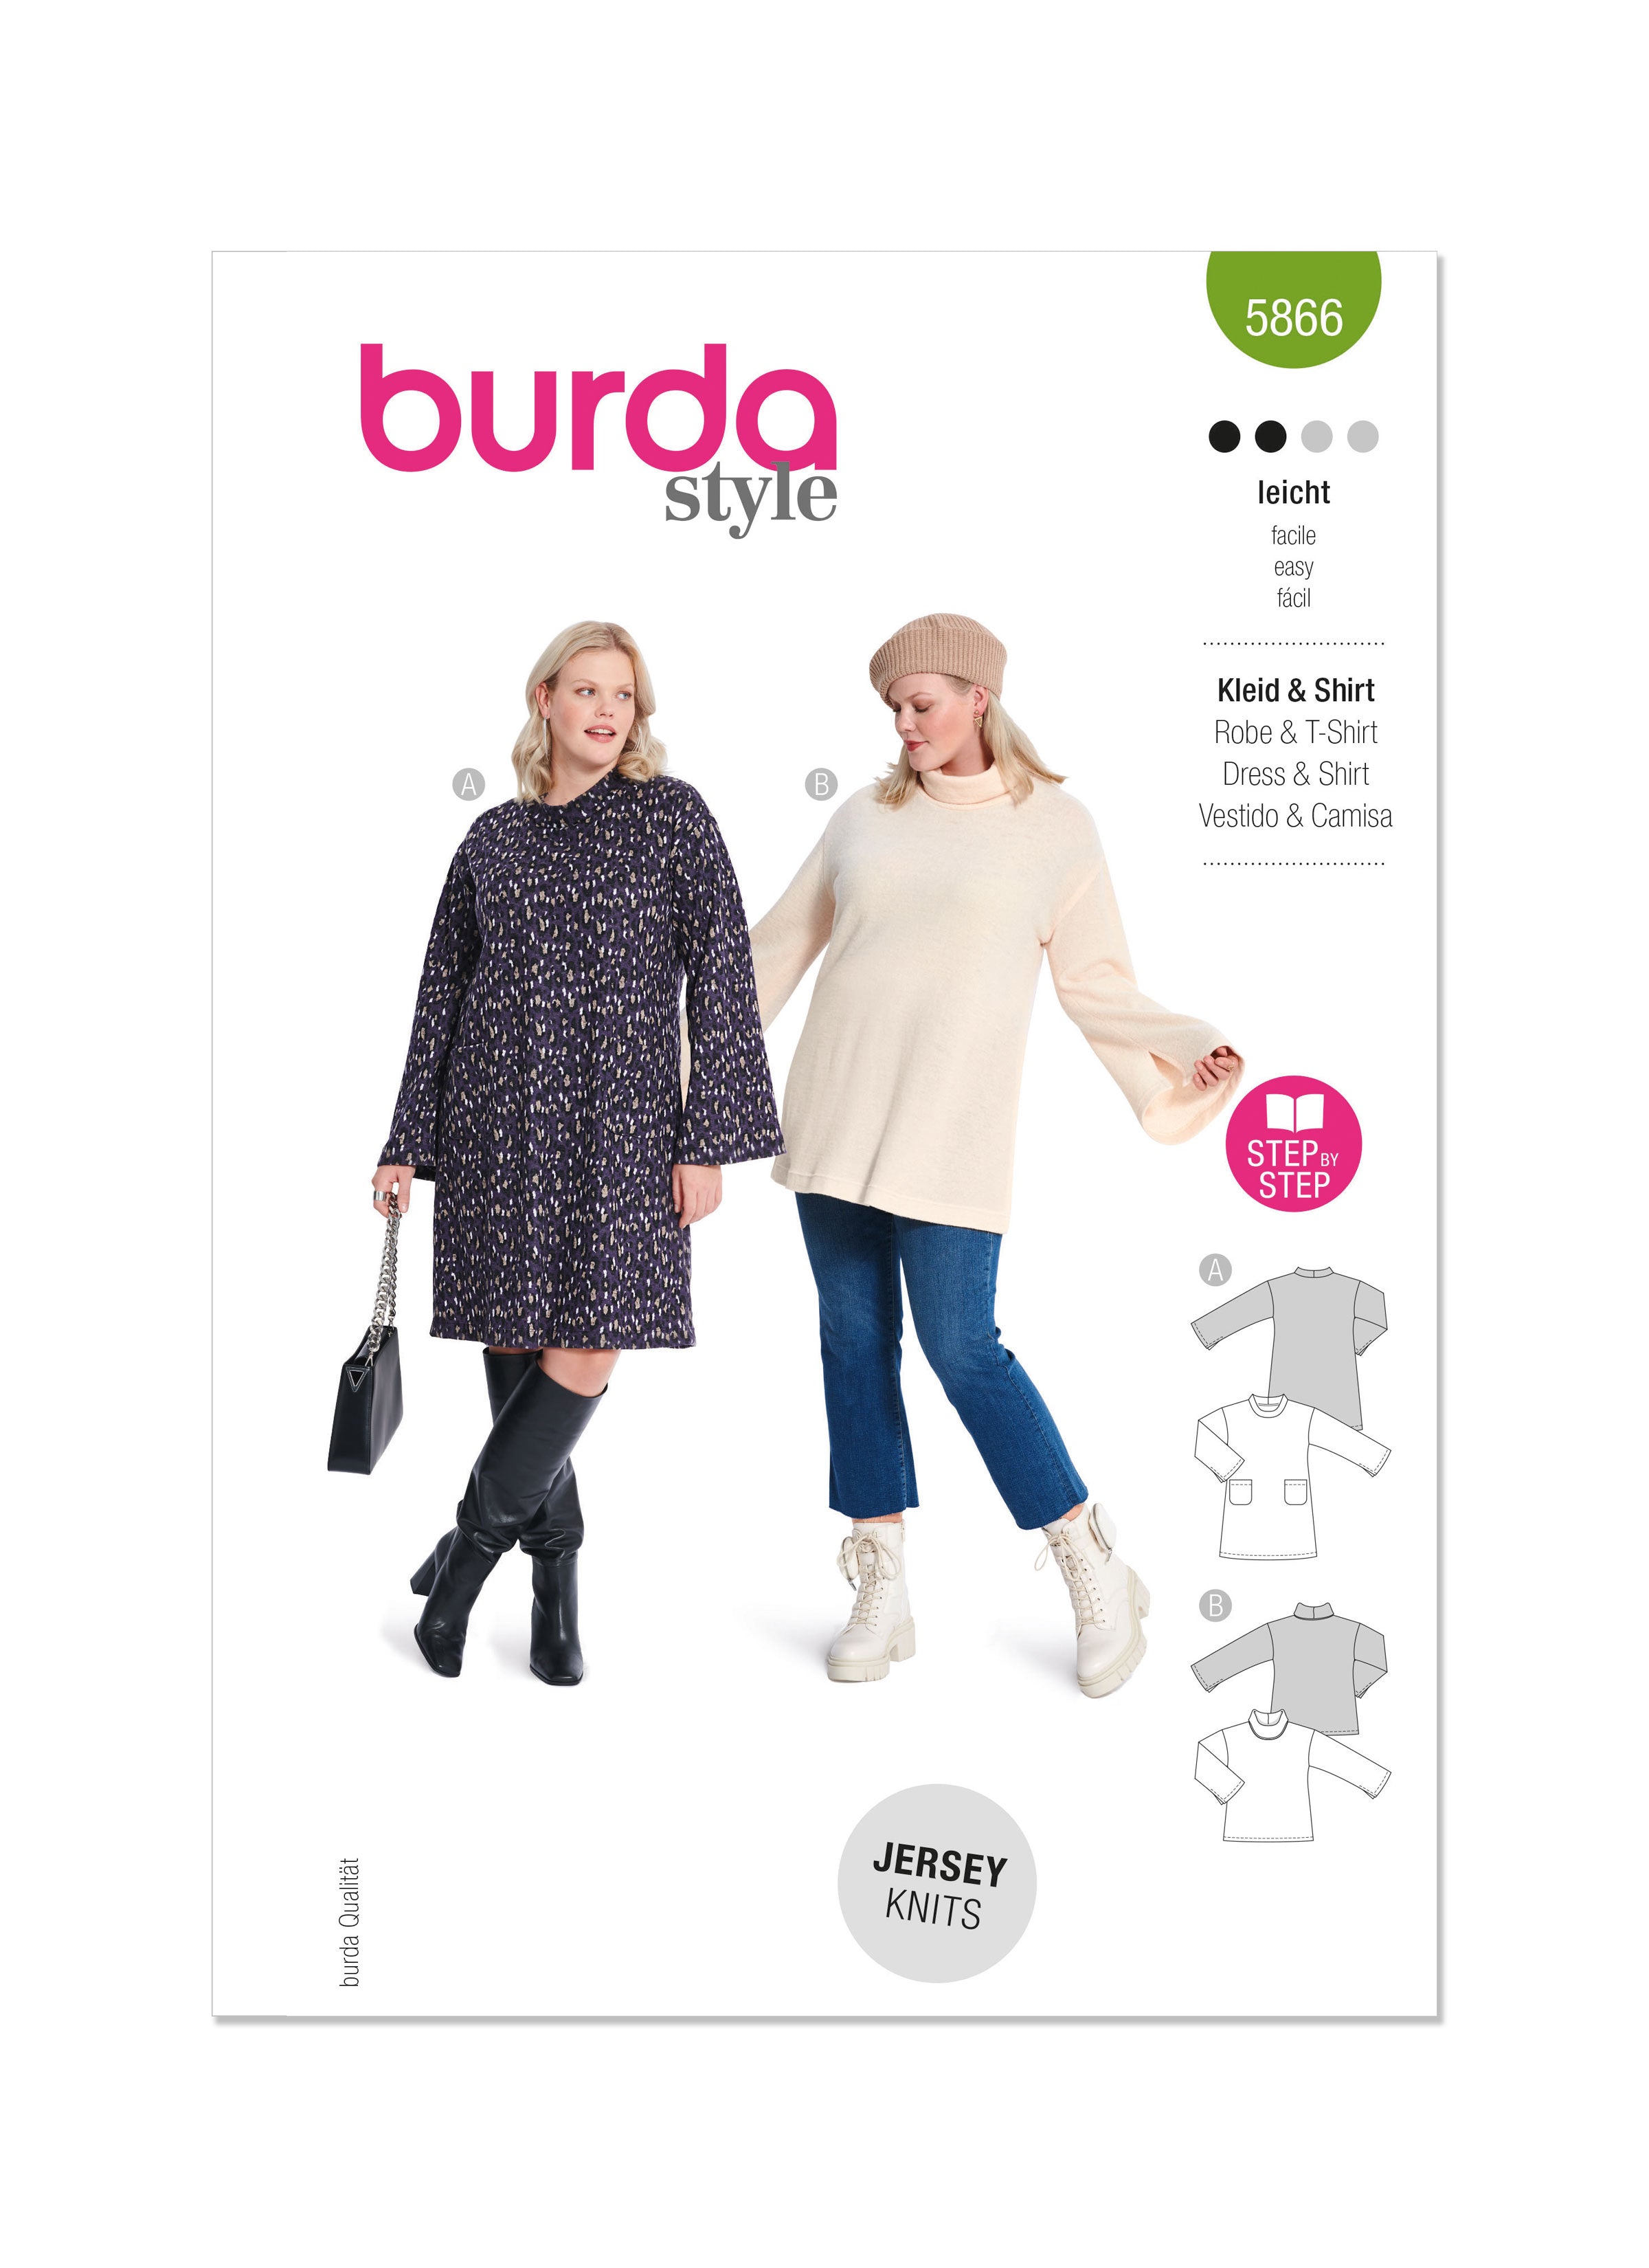 Burda Sewing Pattern 5866 Misses' Dress & Top from Jaycotts Sewing Supplies